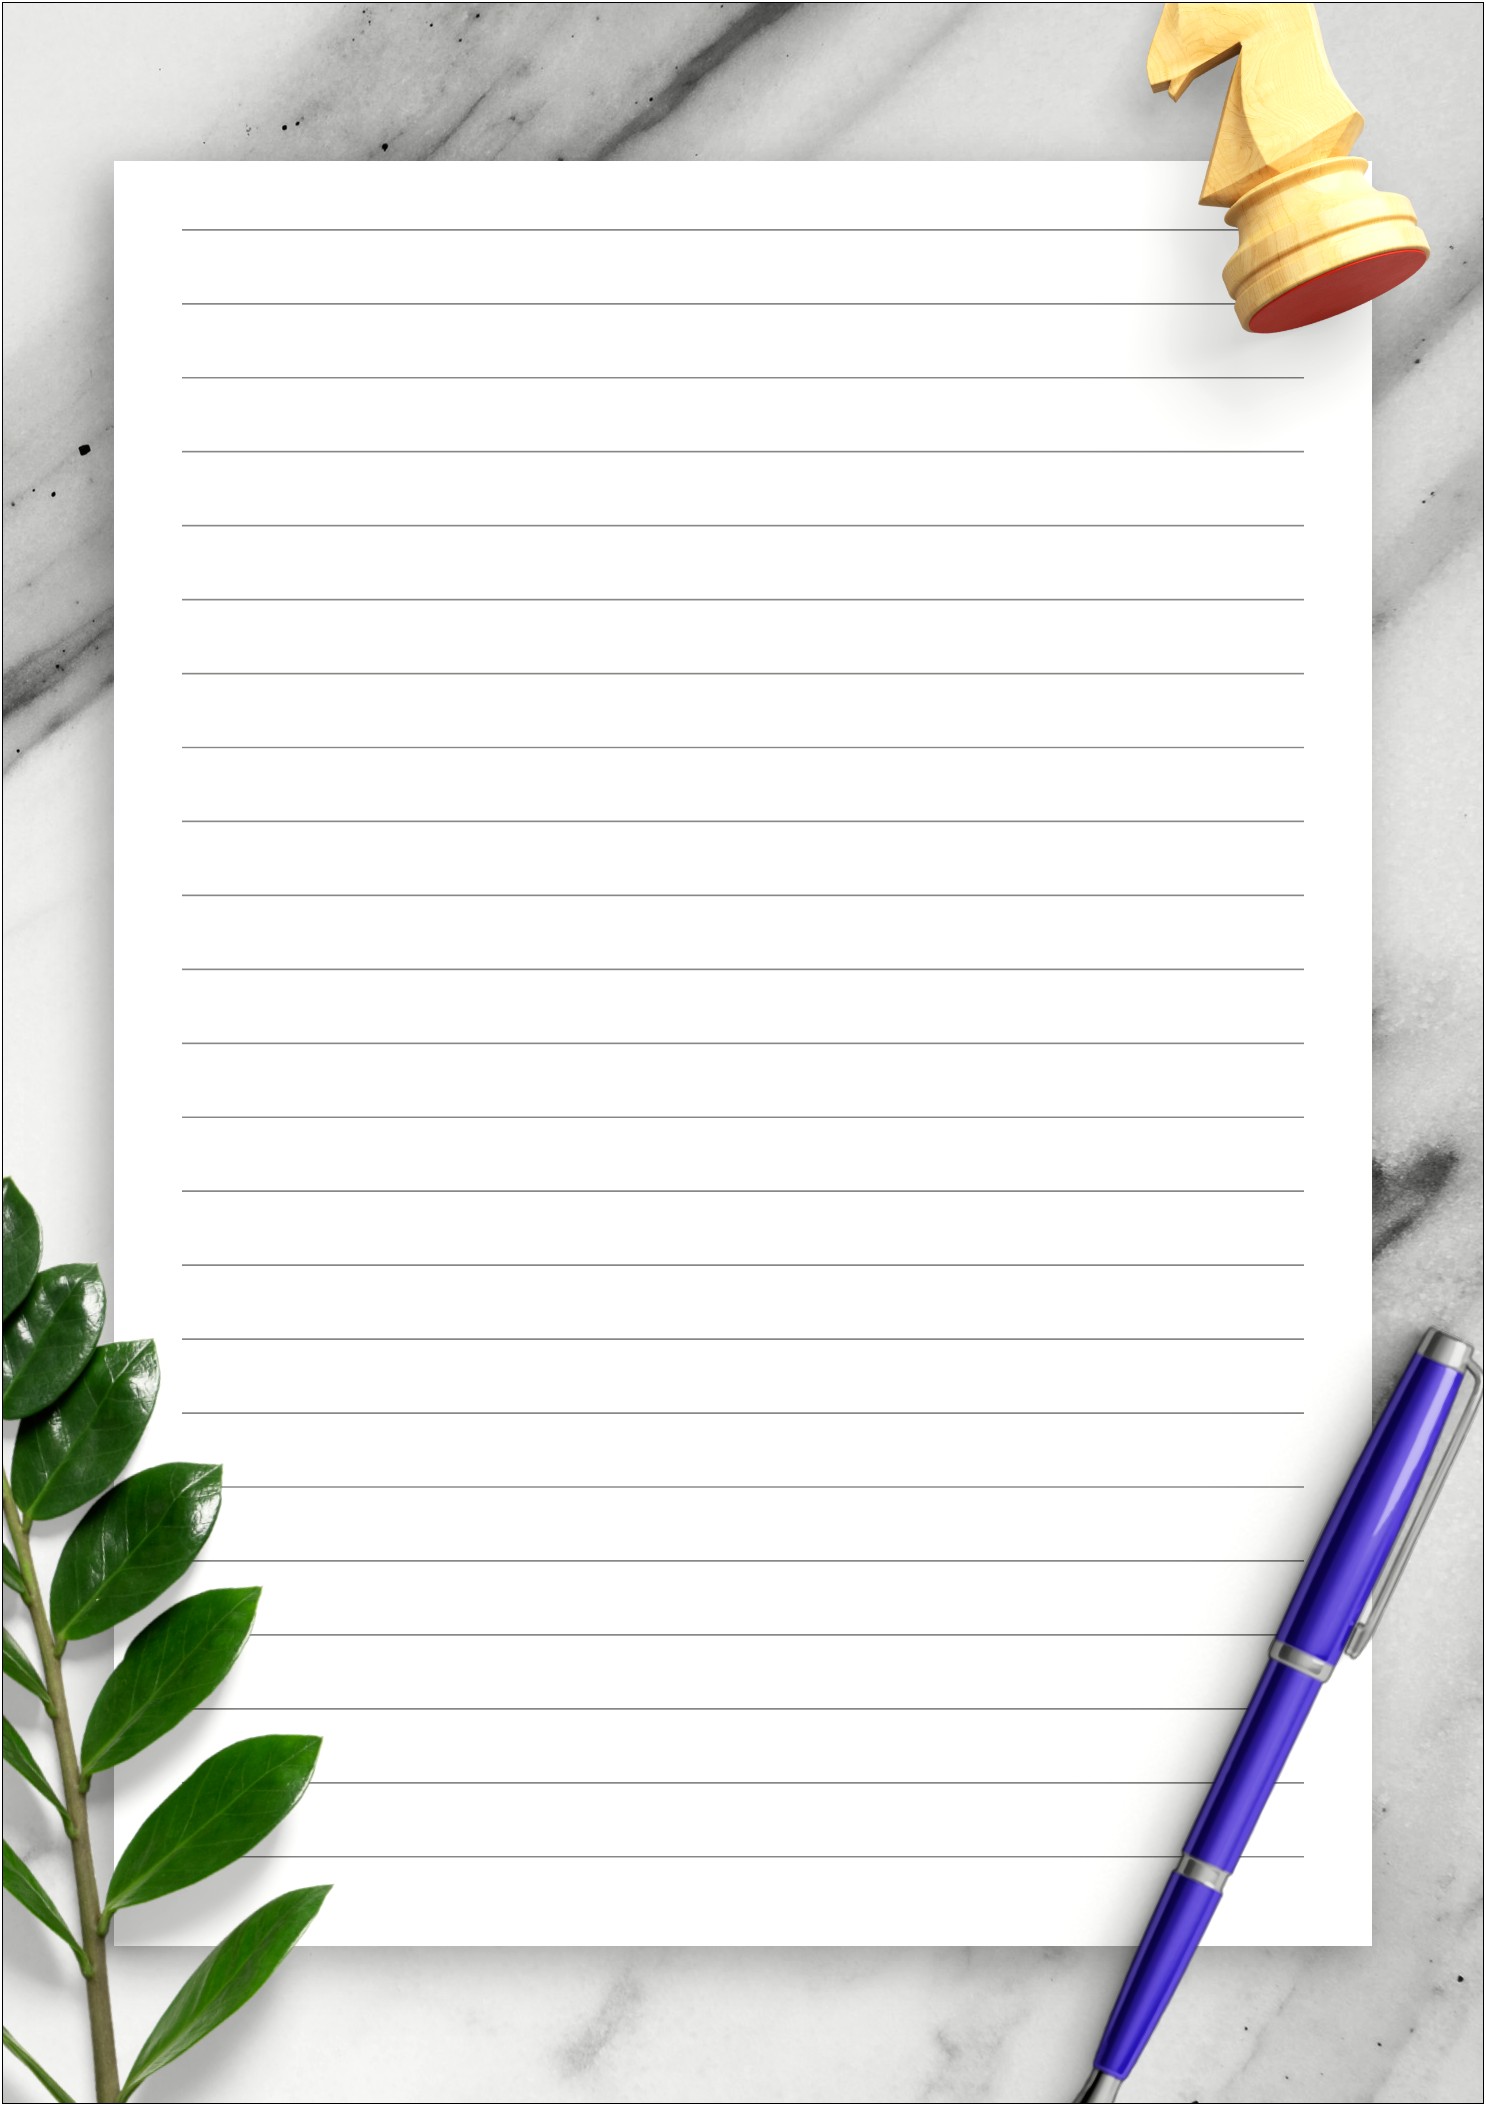 Free Printable Lined Letter Size Stationary Template